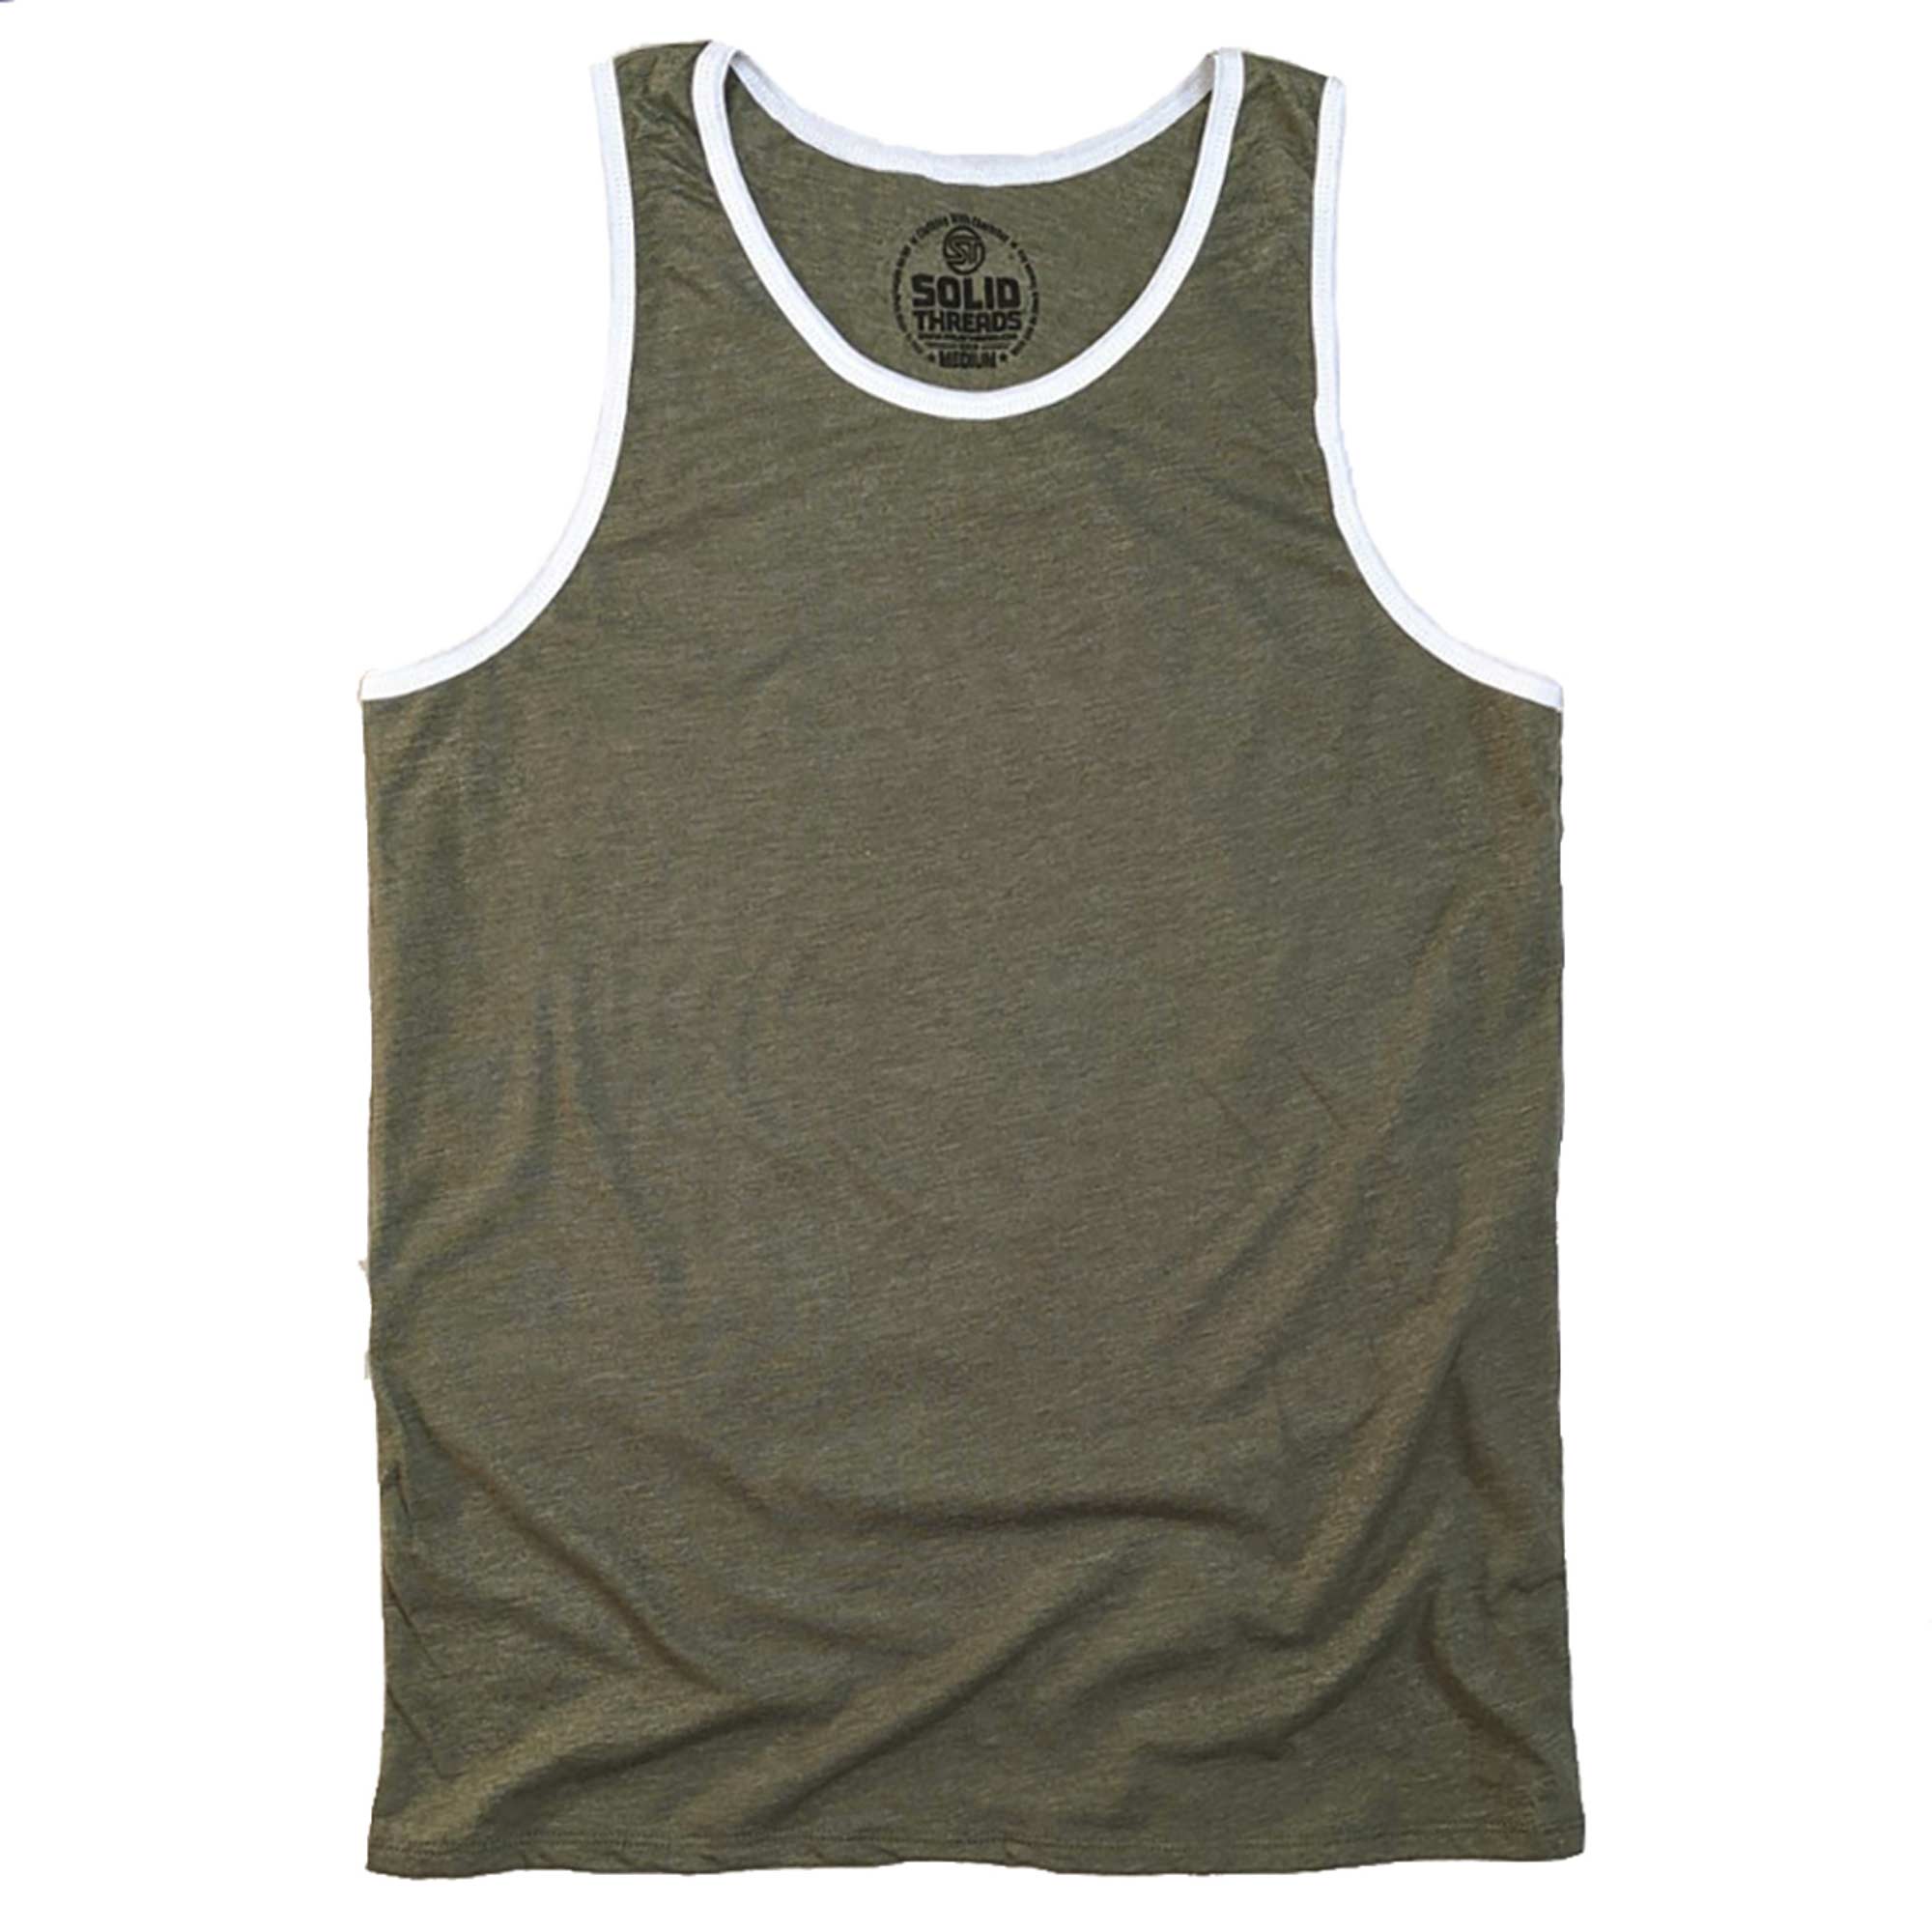 Men's Solid Threads Retro Ringer Tank Top Triblend Olive/White | Vintage Inspired USA Made Tank Top